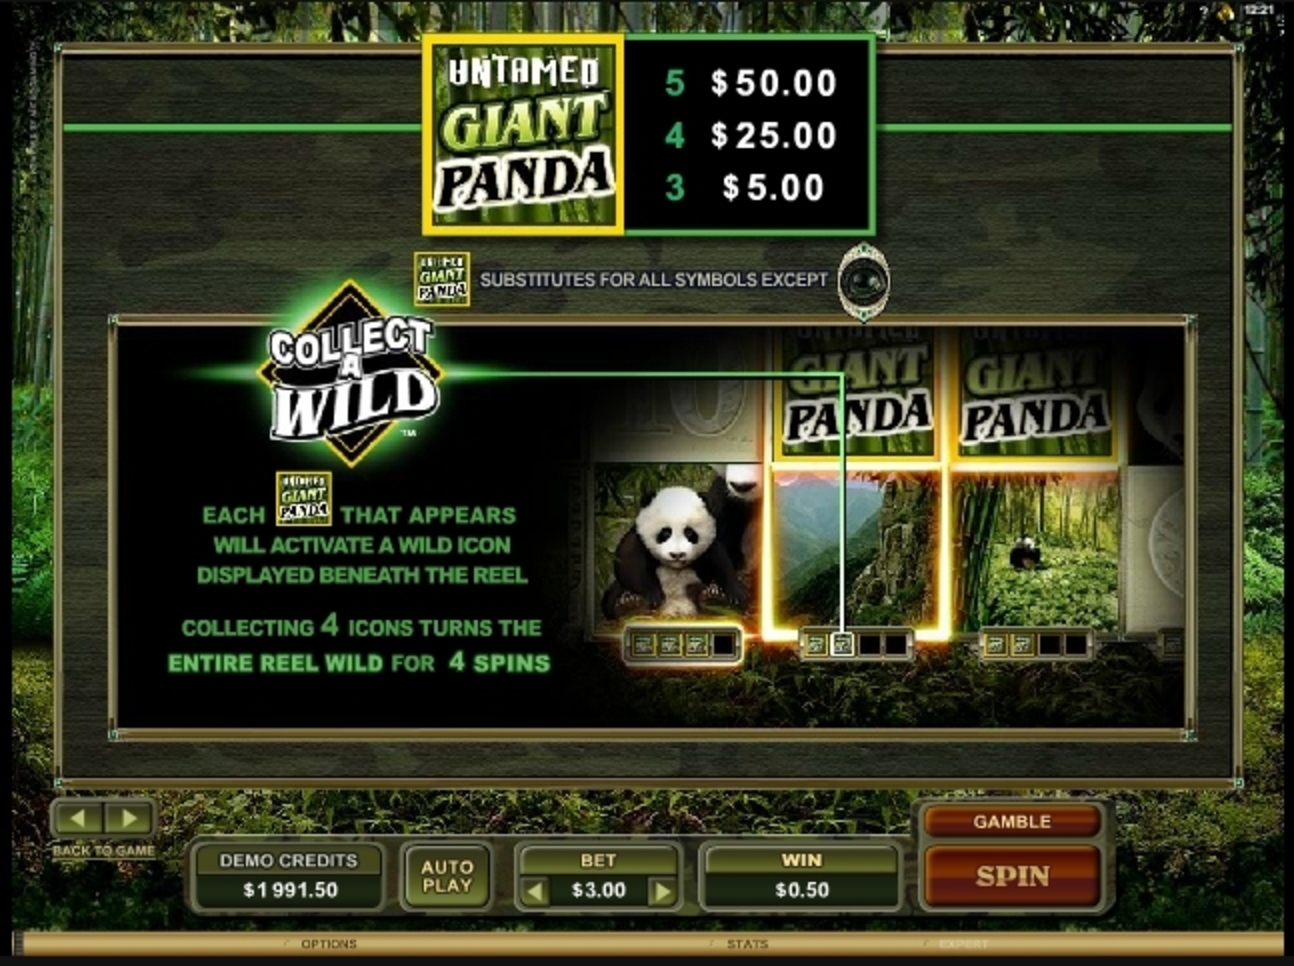 Info of Untamed Giant Panda Slot Game by Microgaming